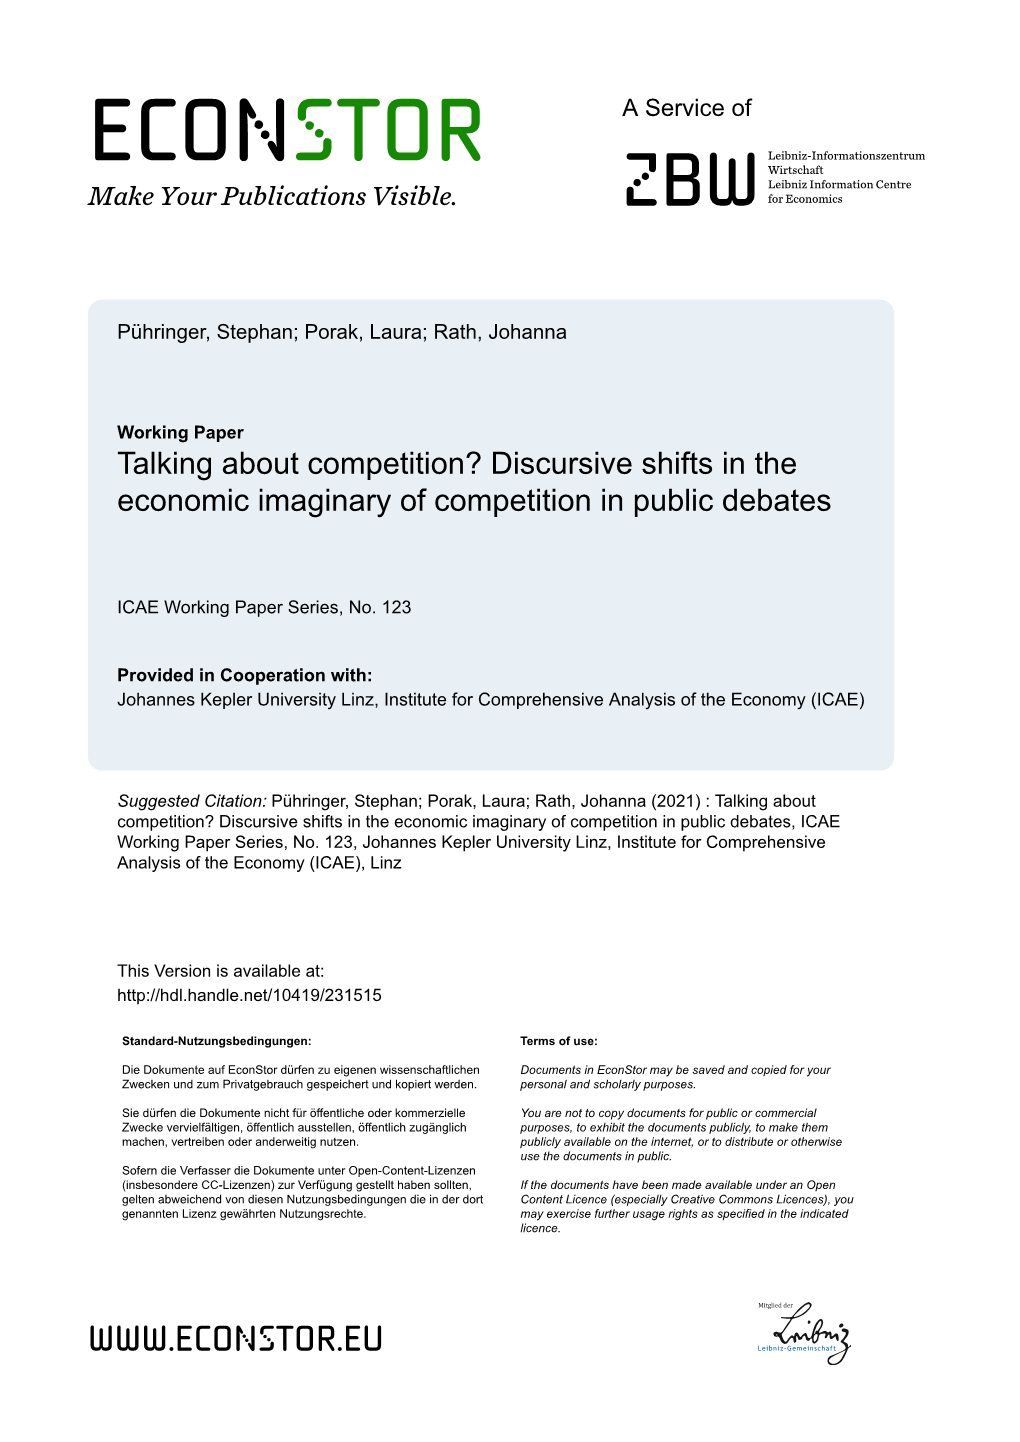 Discursive Shifts in the Economic Imaginary of Competition in Public Debates